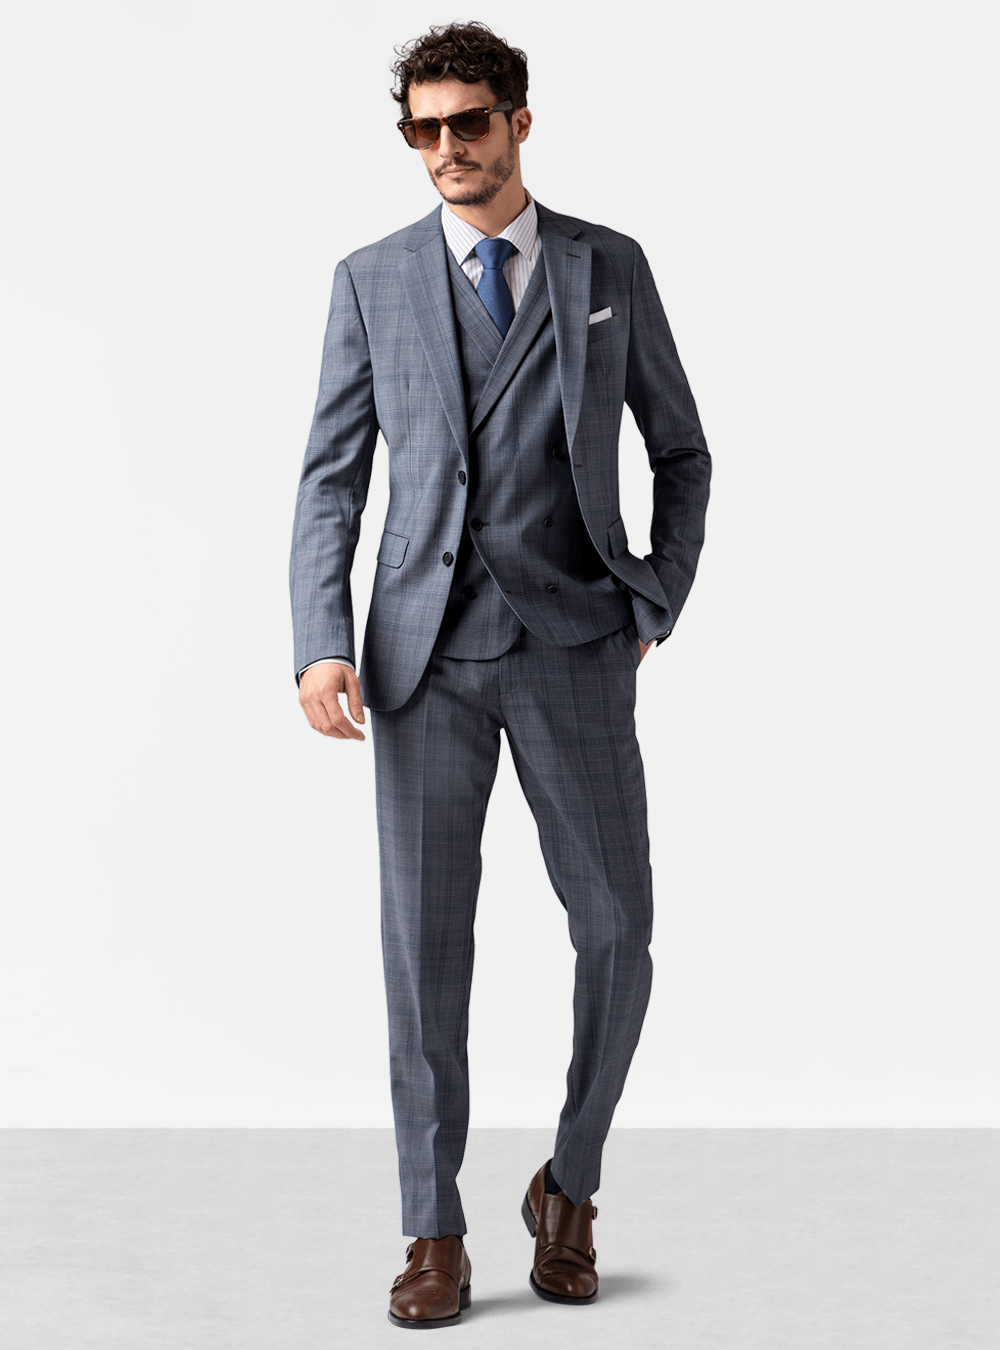 Grey plaid three-piece suit, white striped dress shirt, blue tie and brown double monks